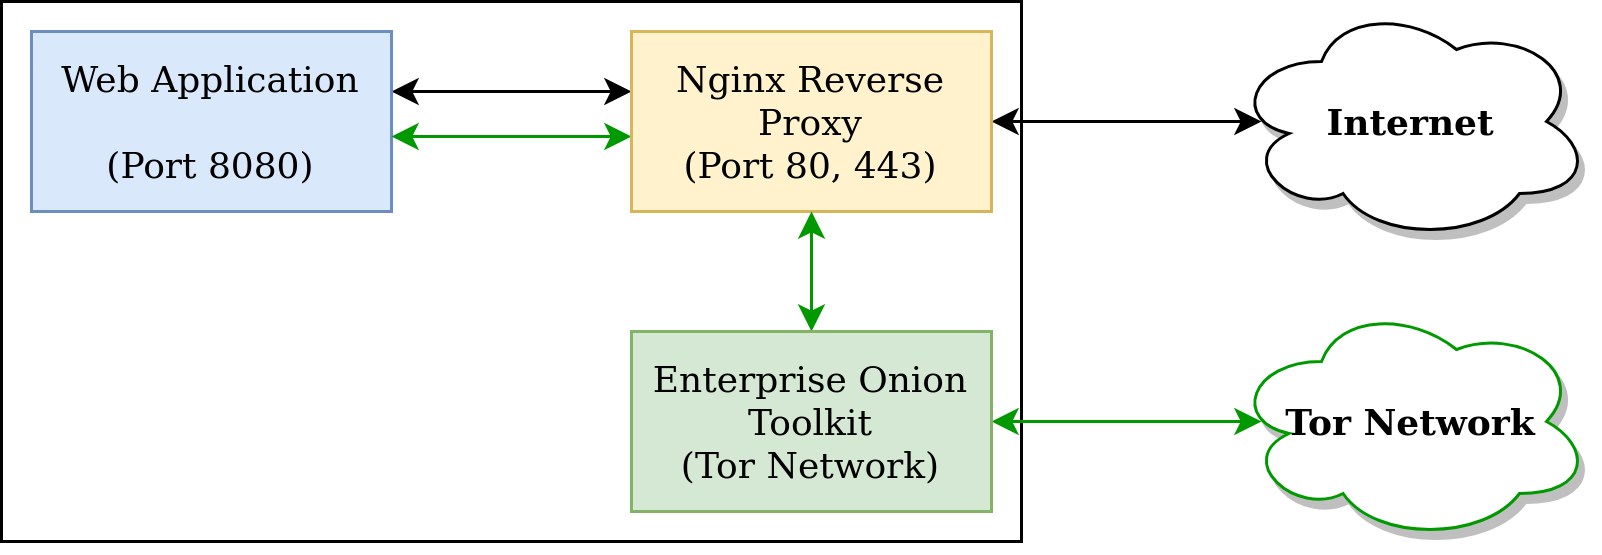 A flowchart like diagram of a web application connected to a Nginx reverse proxy, which is connected in turn to the internet. The Enterprise Onion Toolkit (EOTK) sits on another branch giving a path between Nginx and the Tor Network.